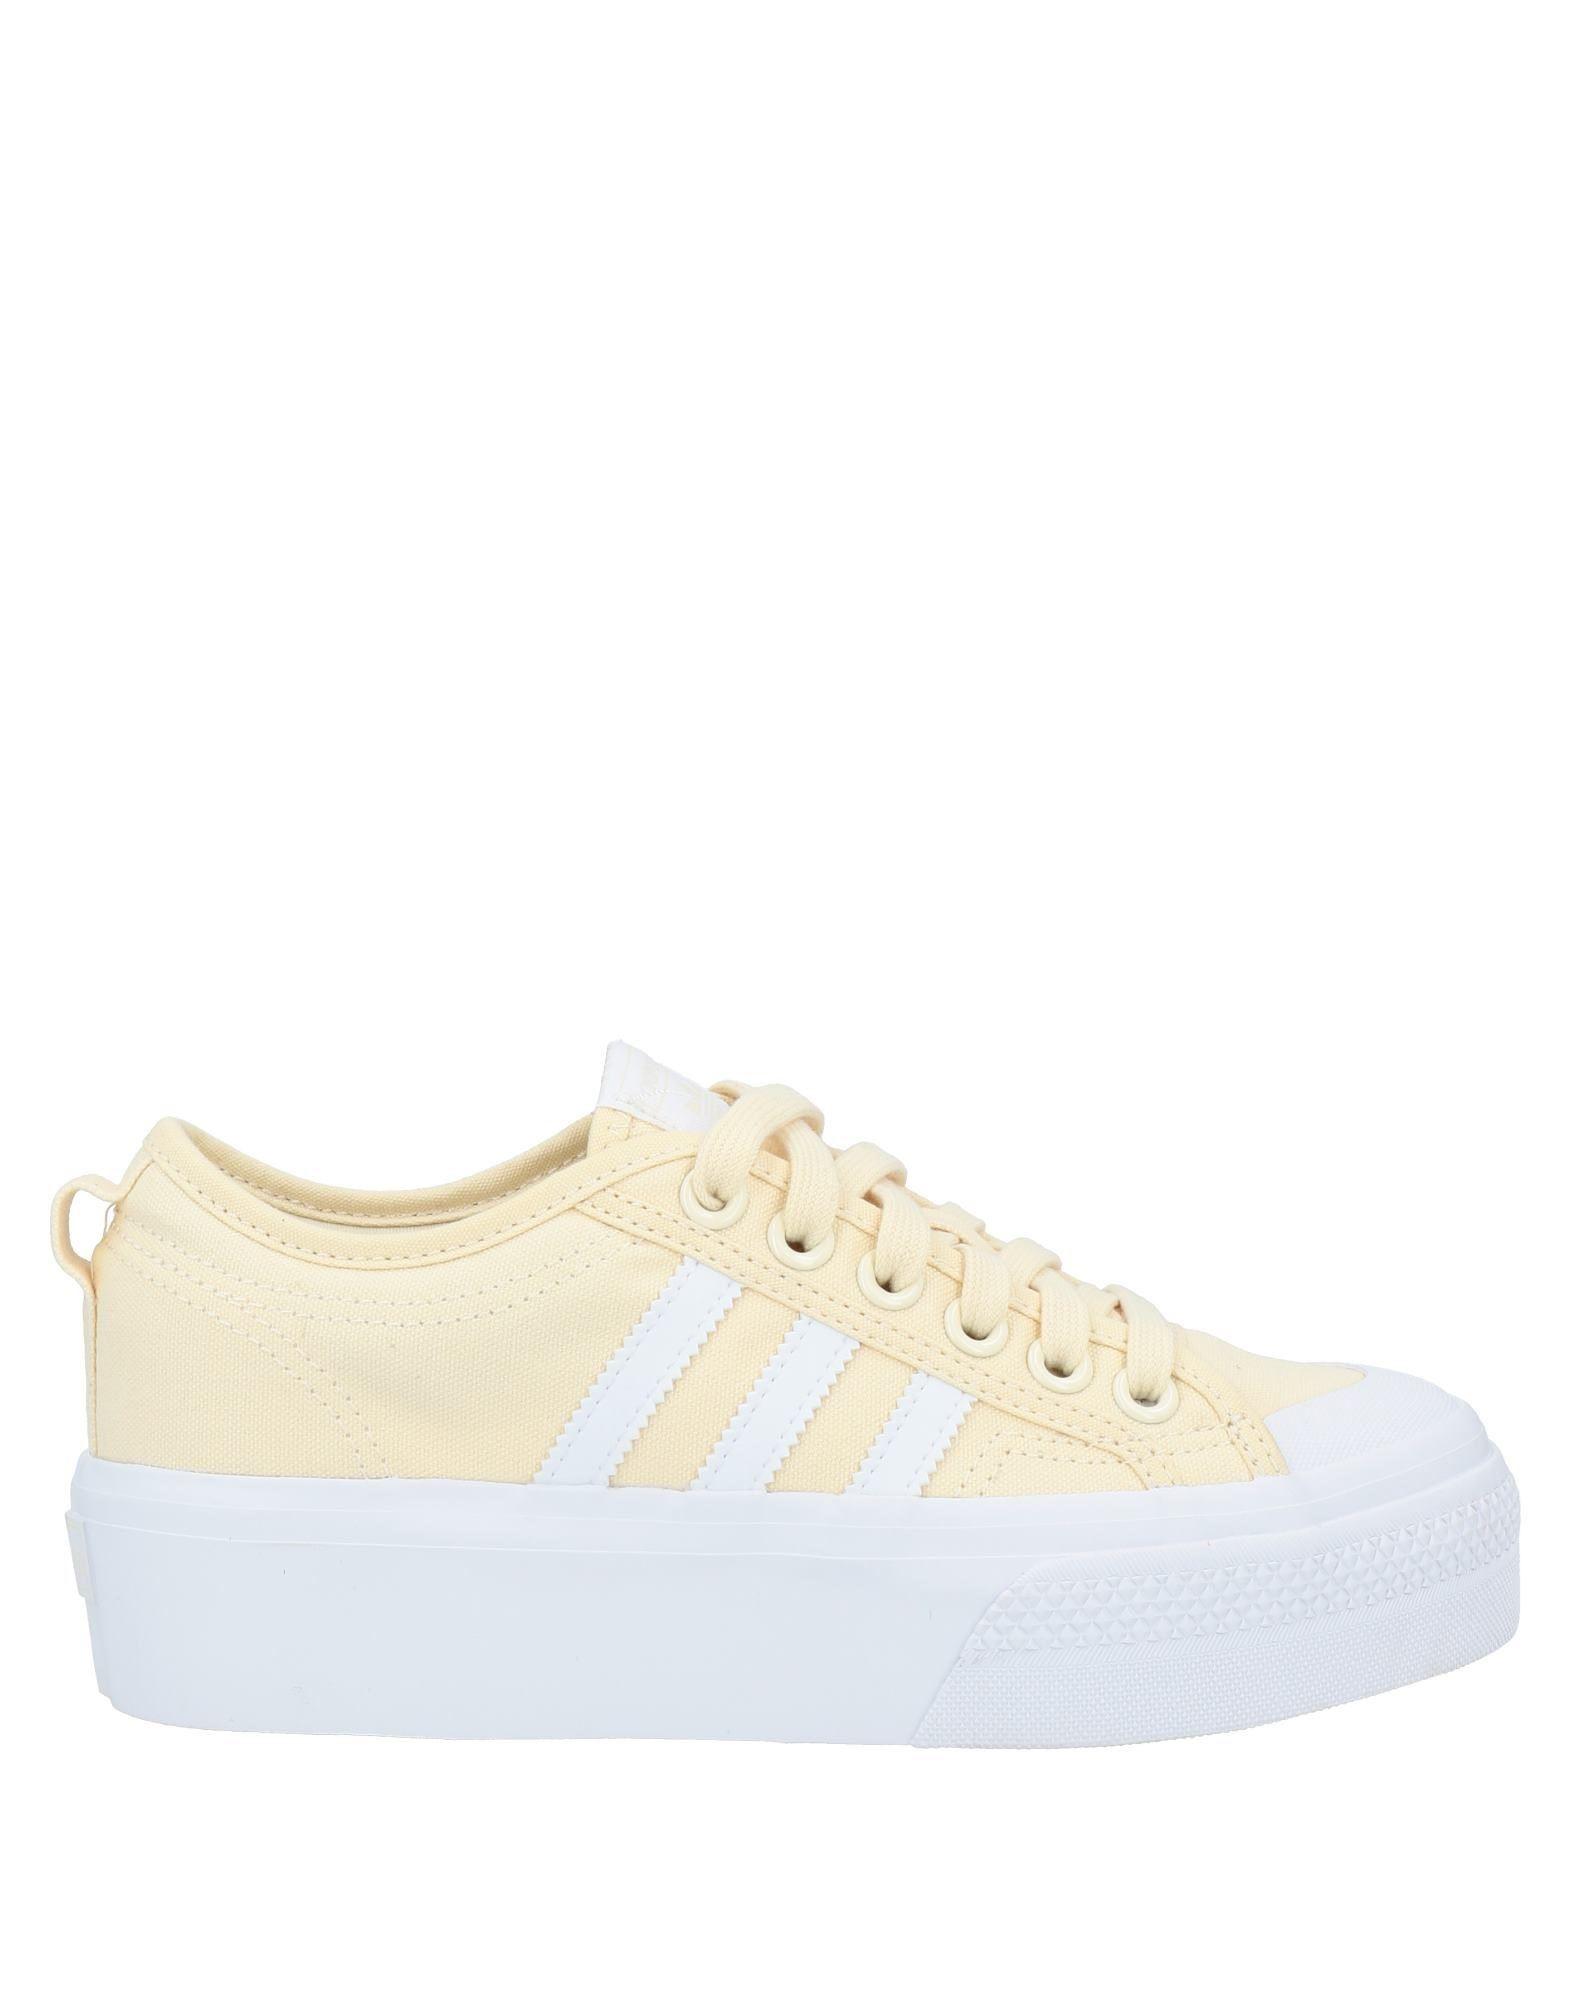 adidas Originals Trainers in Yellow | Lyst